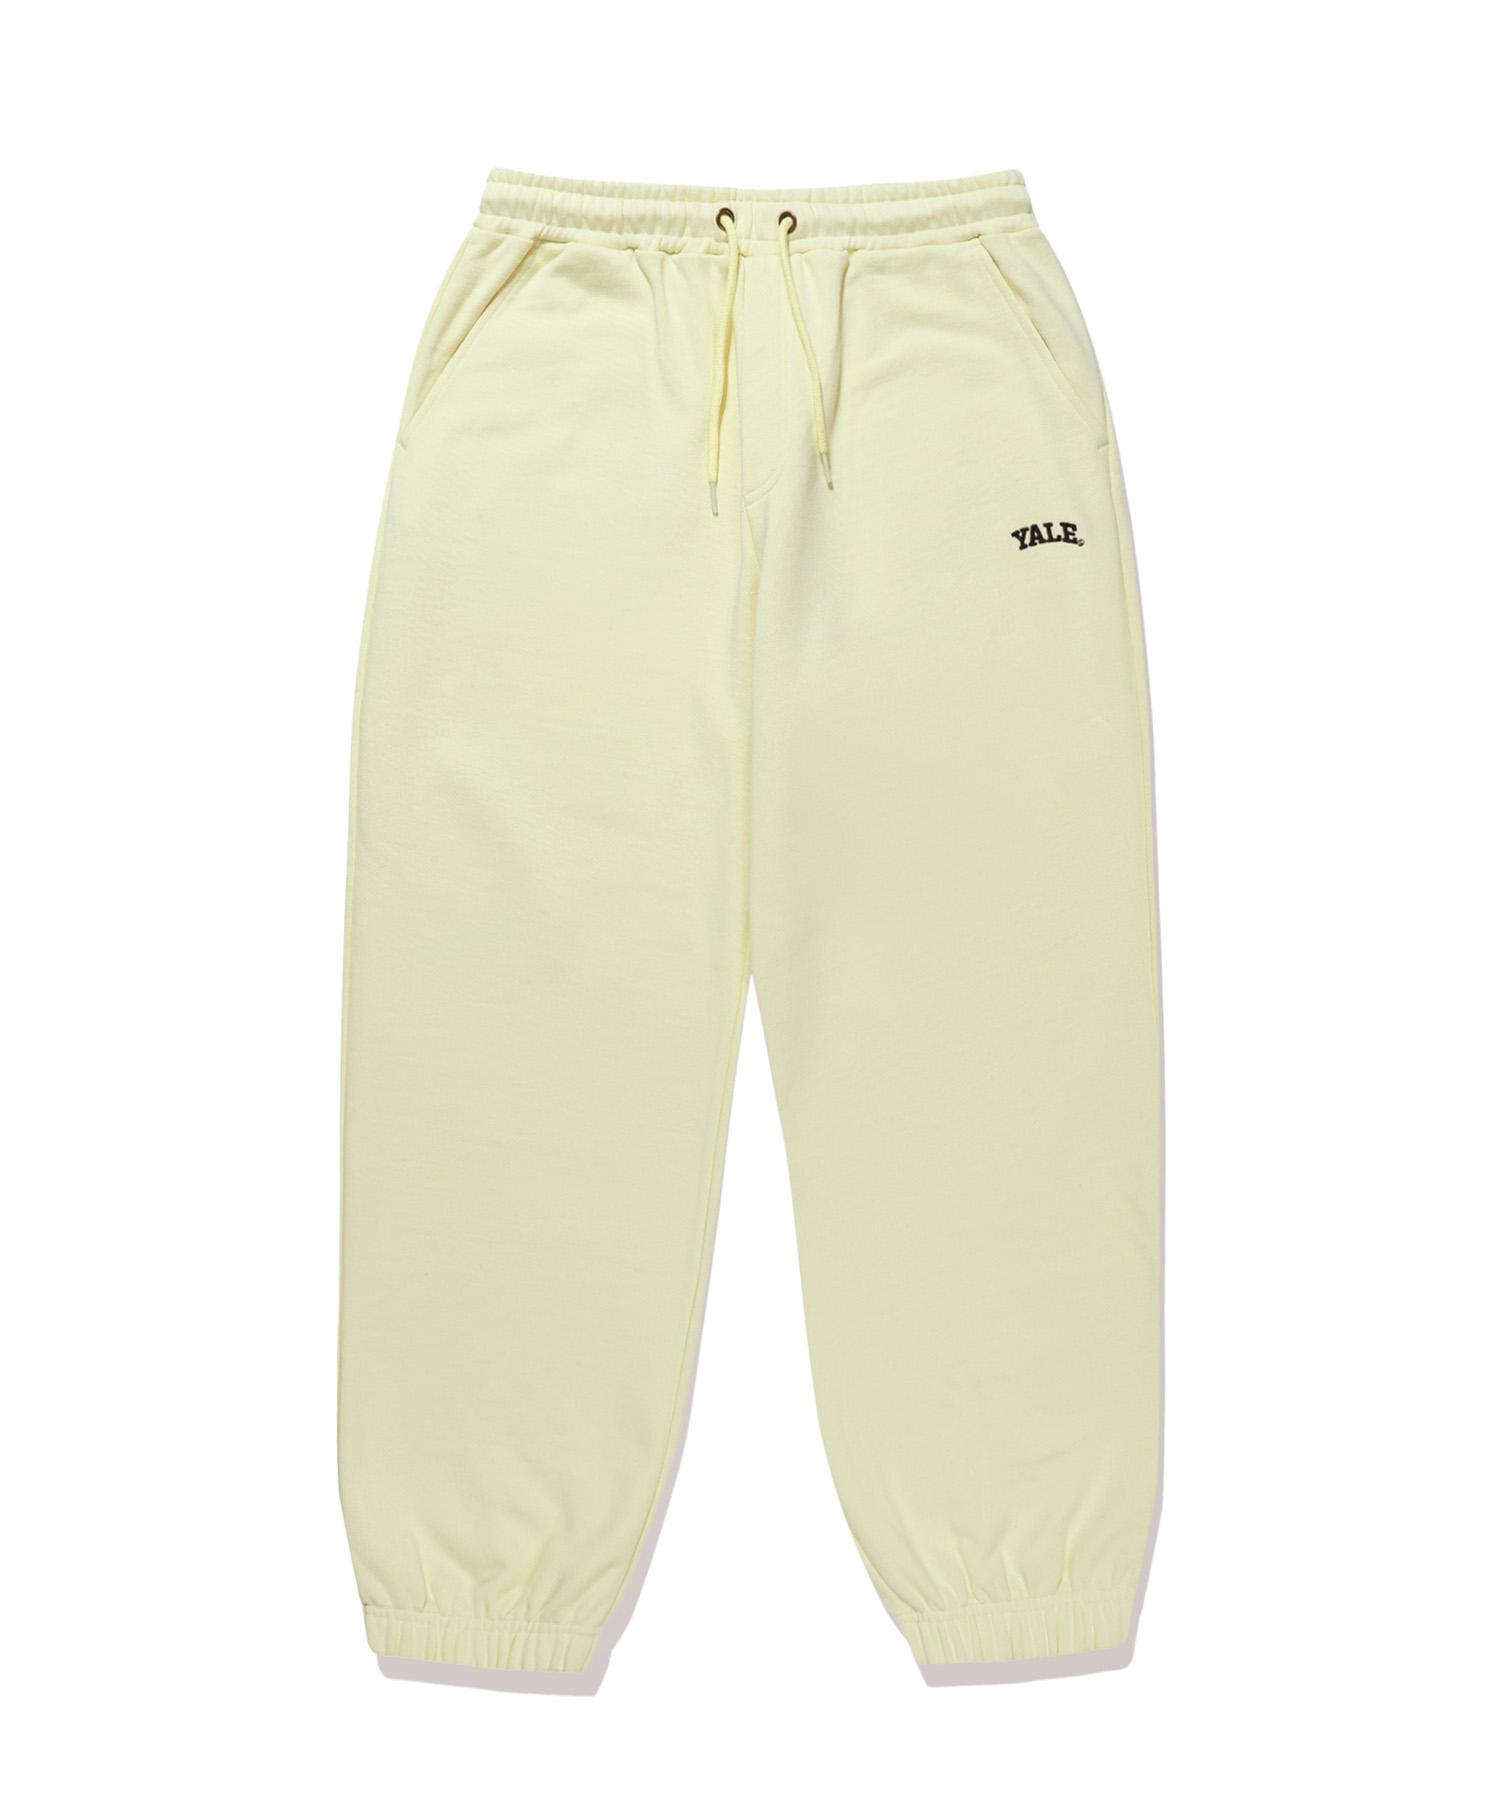 (23FW) [ONEMILE WEAR] SMALL ARCH SWEAT PANTS LIGHT YELLOW